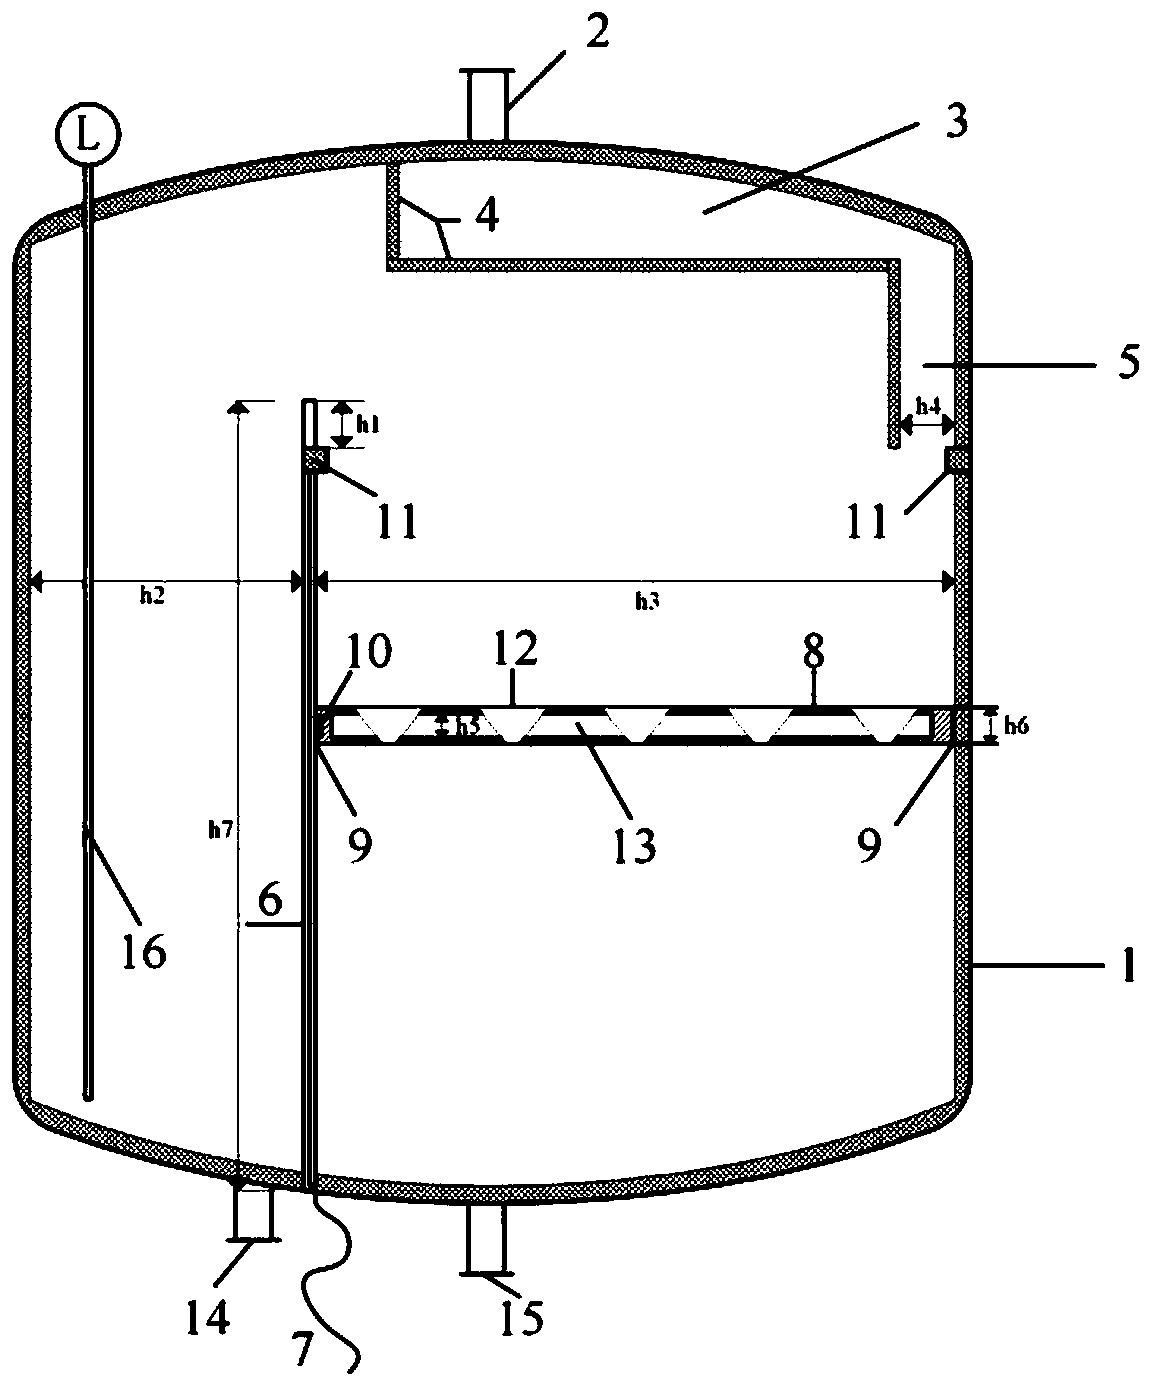 Oil-water separator and separation system